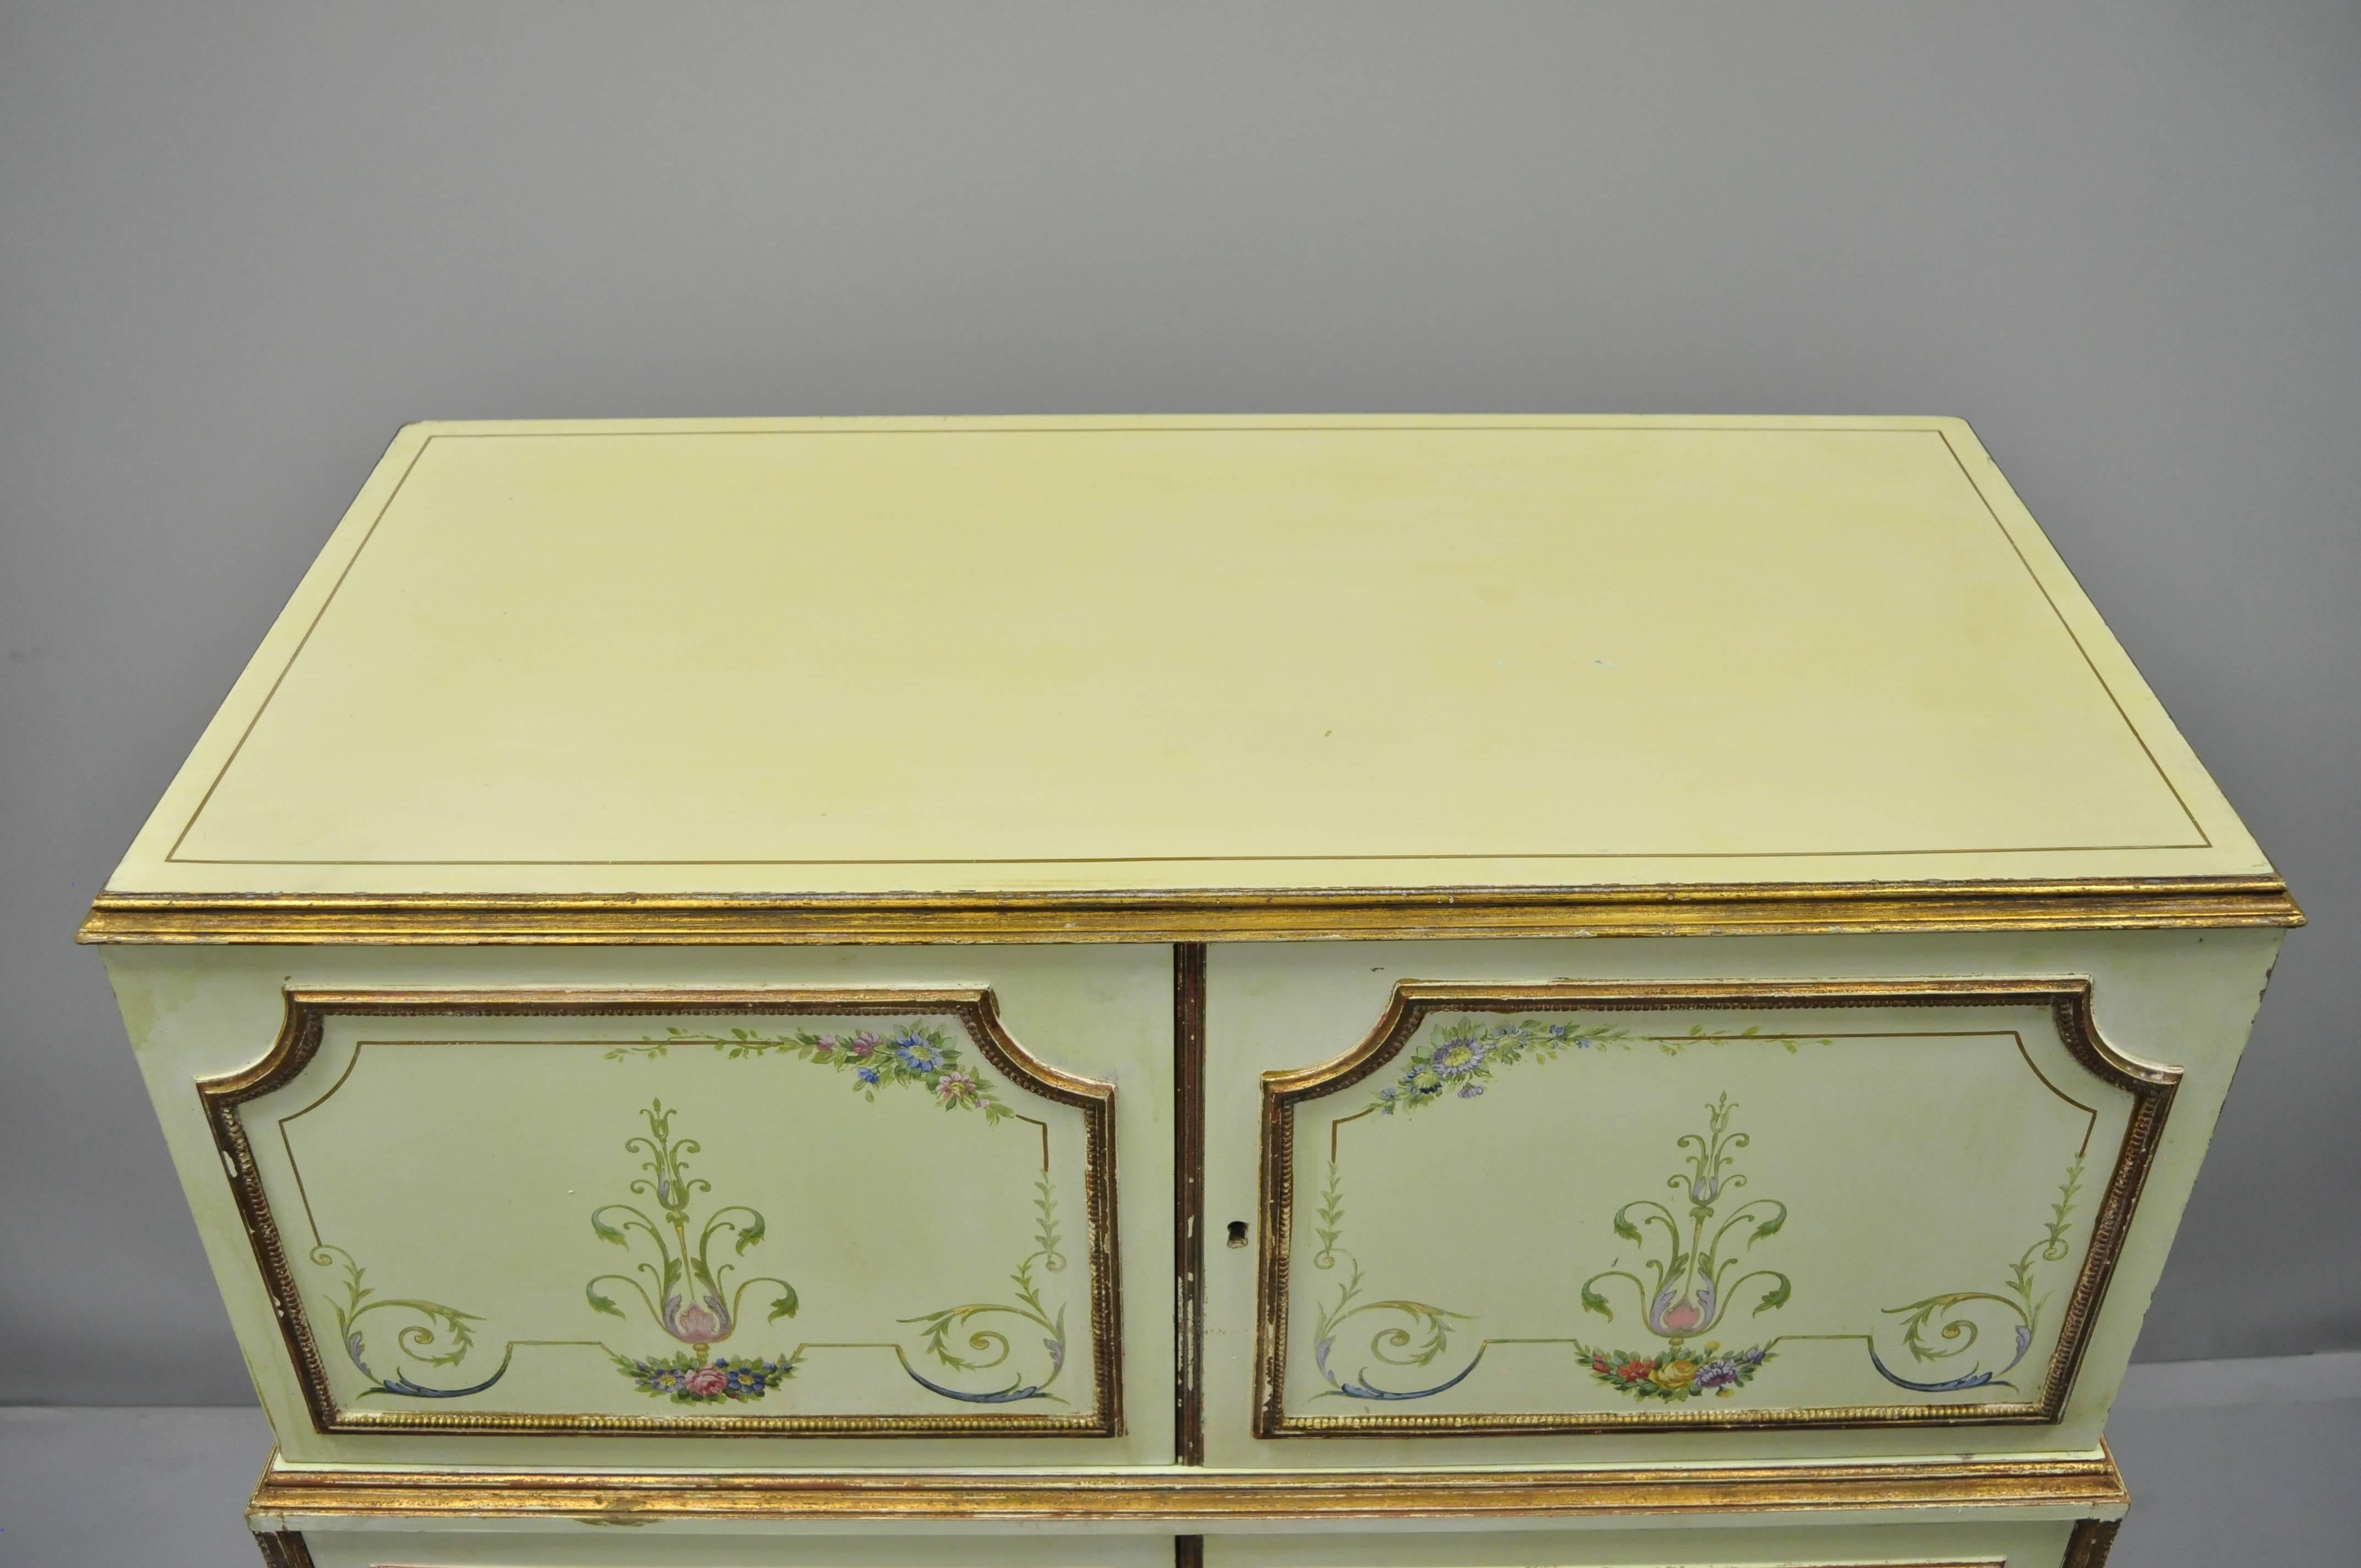 Antique Adams Style Green Painted Chest of Drawers Dresser by New York Galleries 1